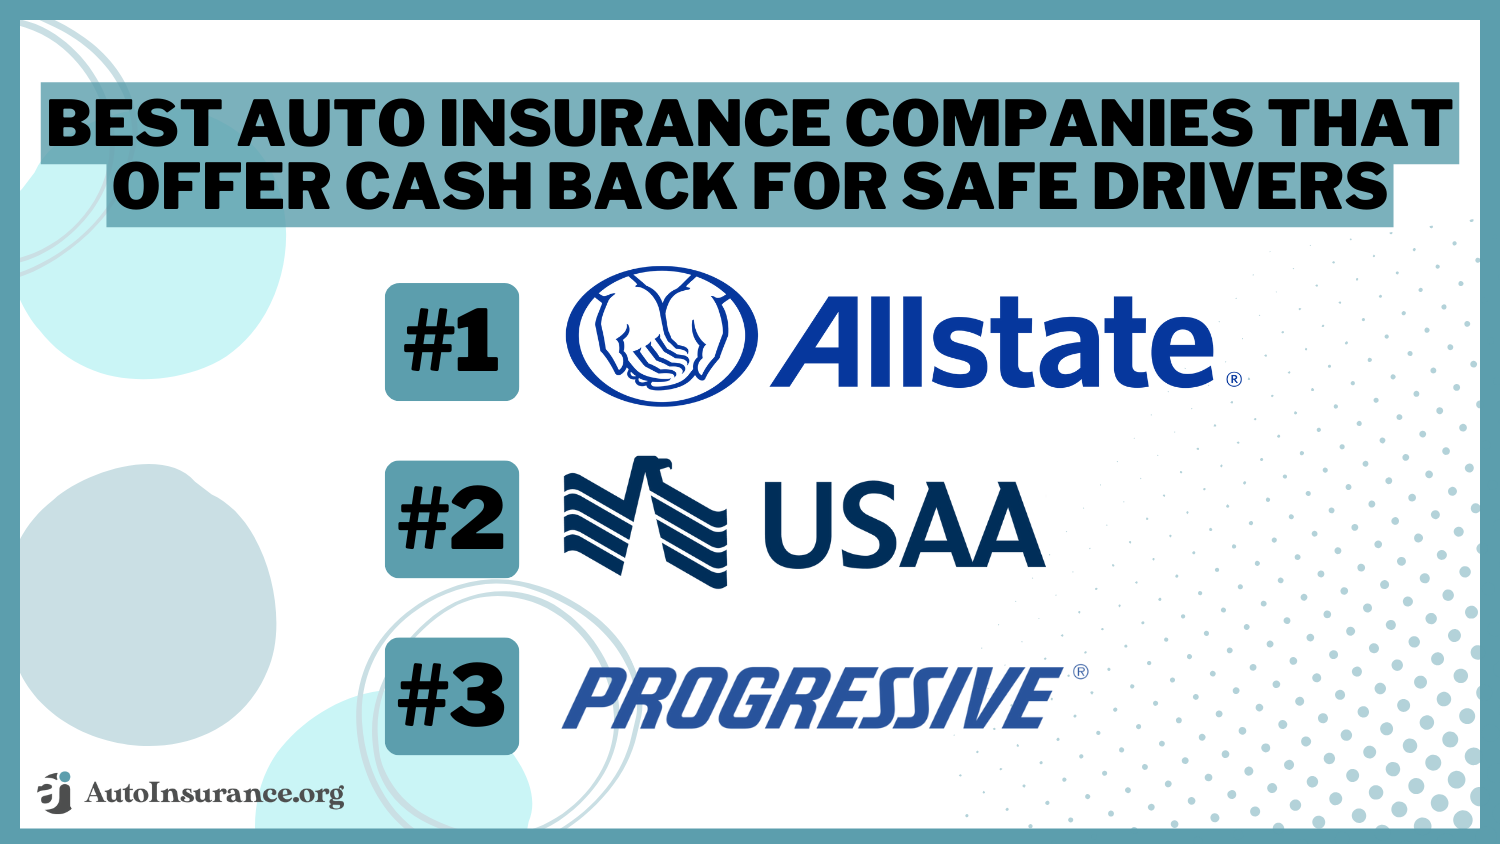 Best Auto Insurance Companies That Offer Cash Back for Safe Drivers 